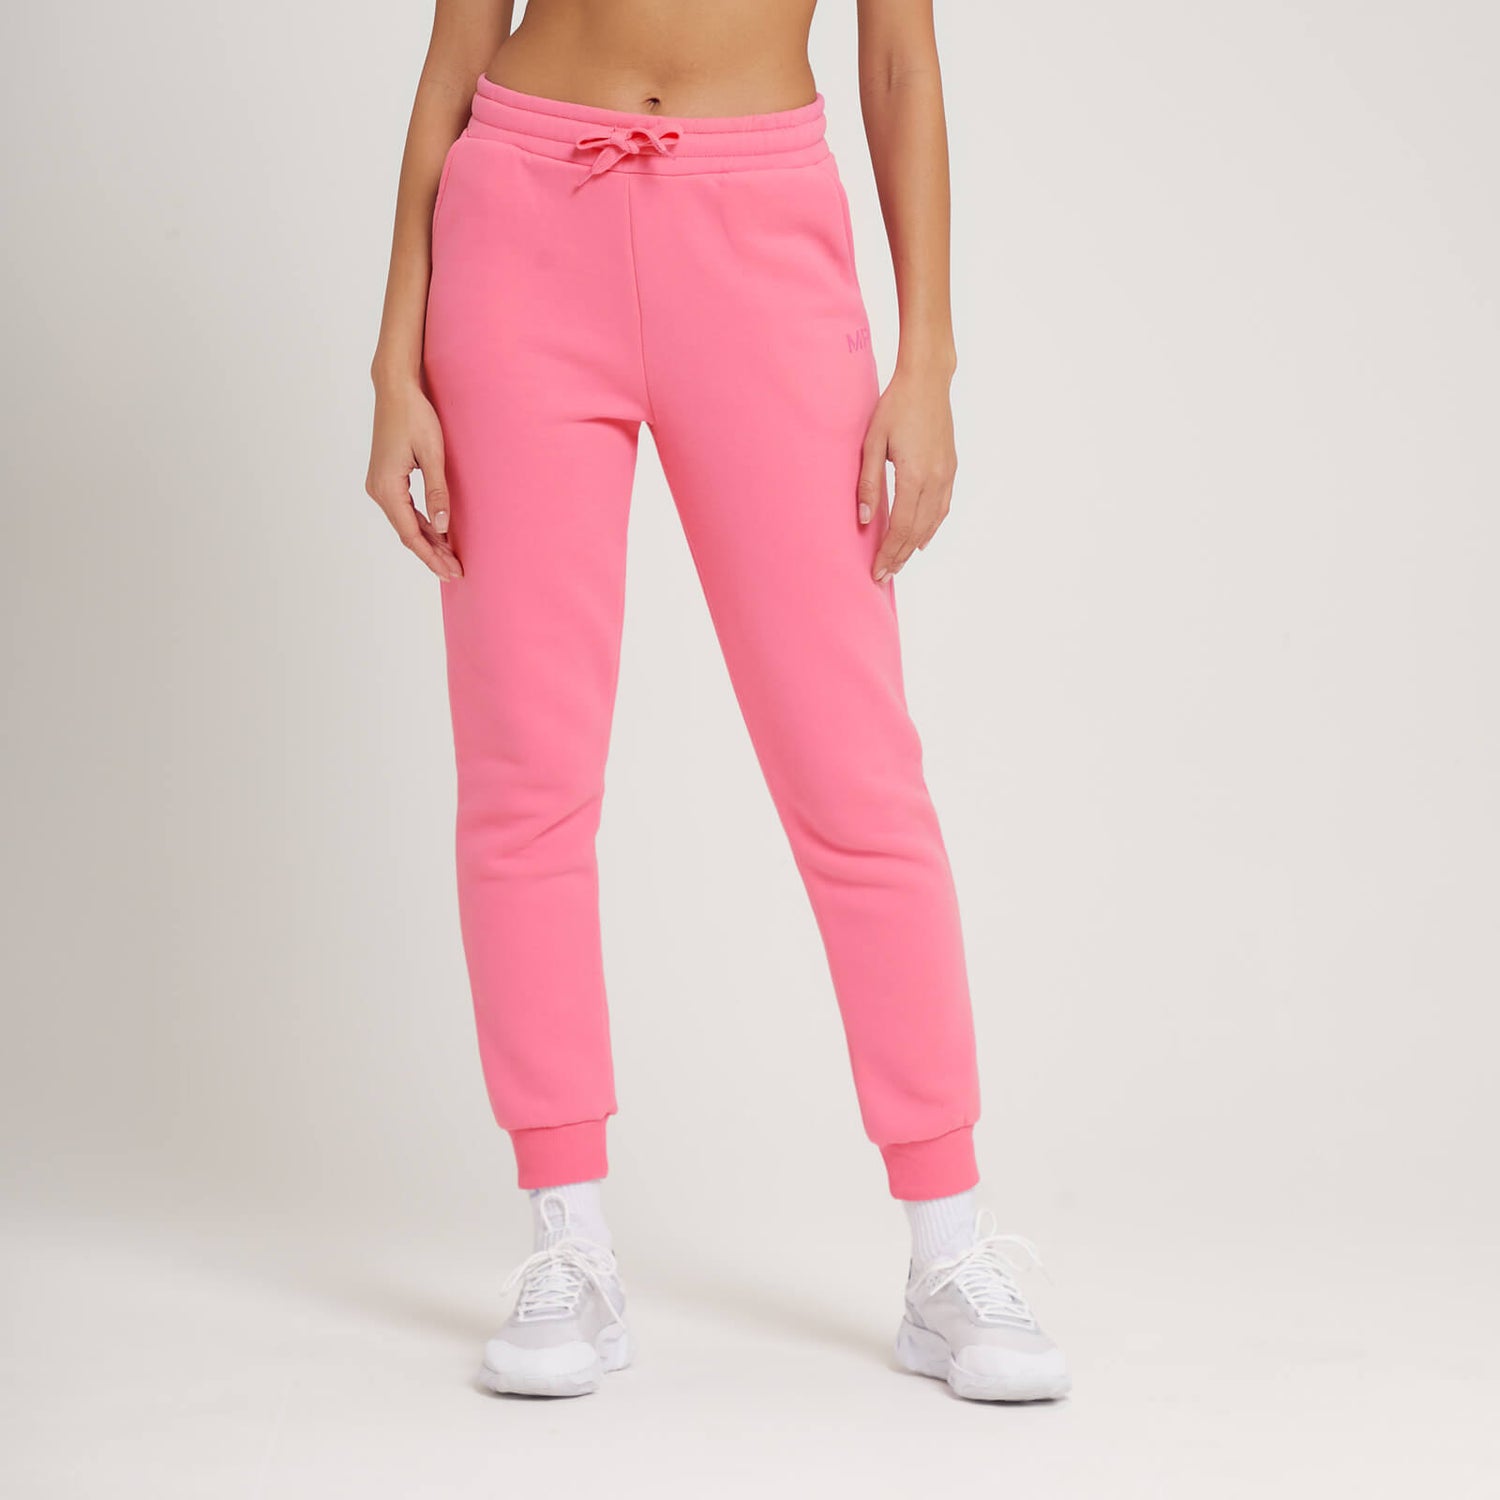 MP Women's Fade Graphic Jogger - Candy Floss - S